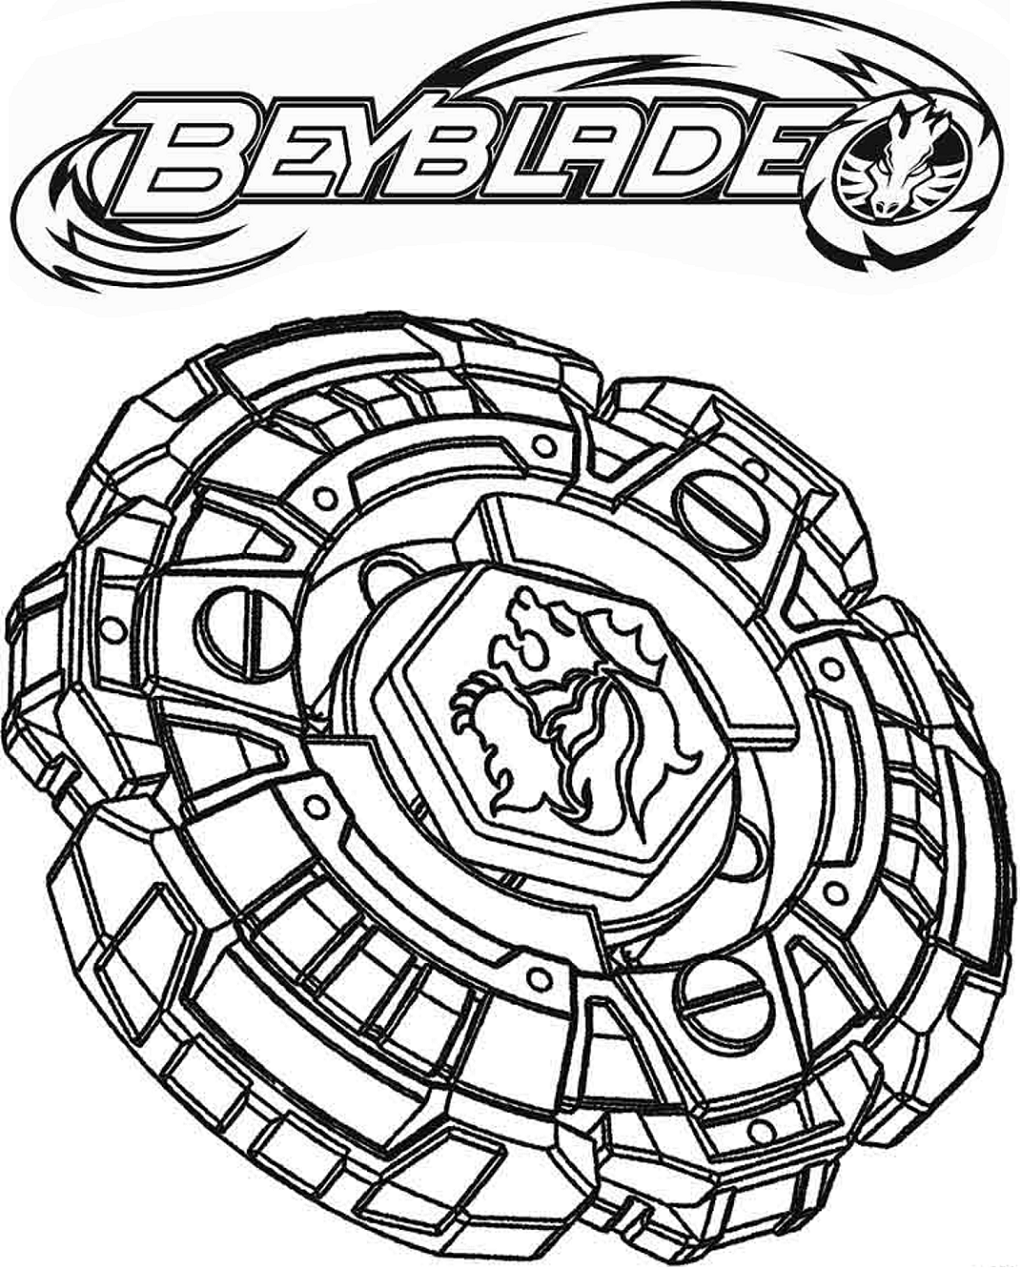 Beyblade Rock Leone Coloring Page - Free Printable ...